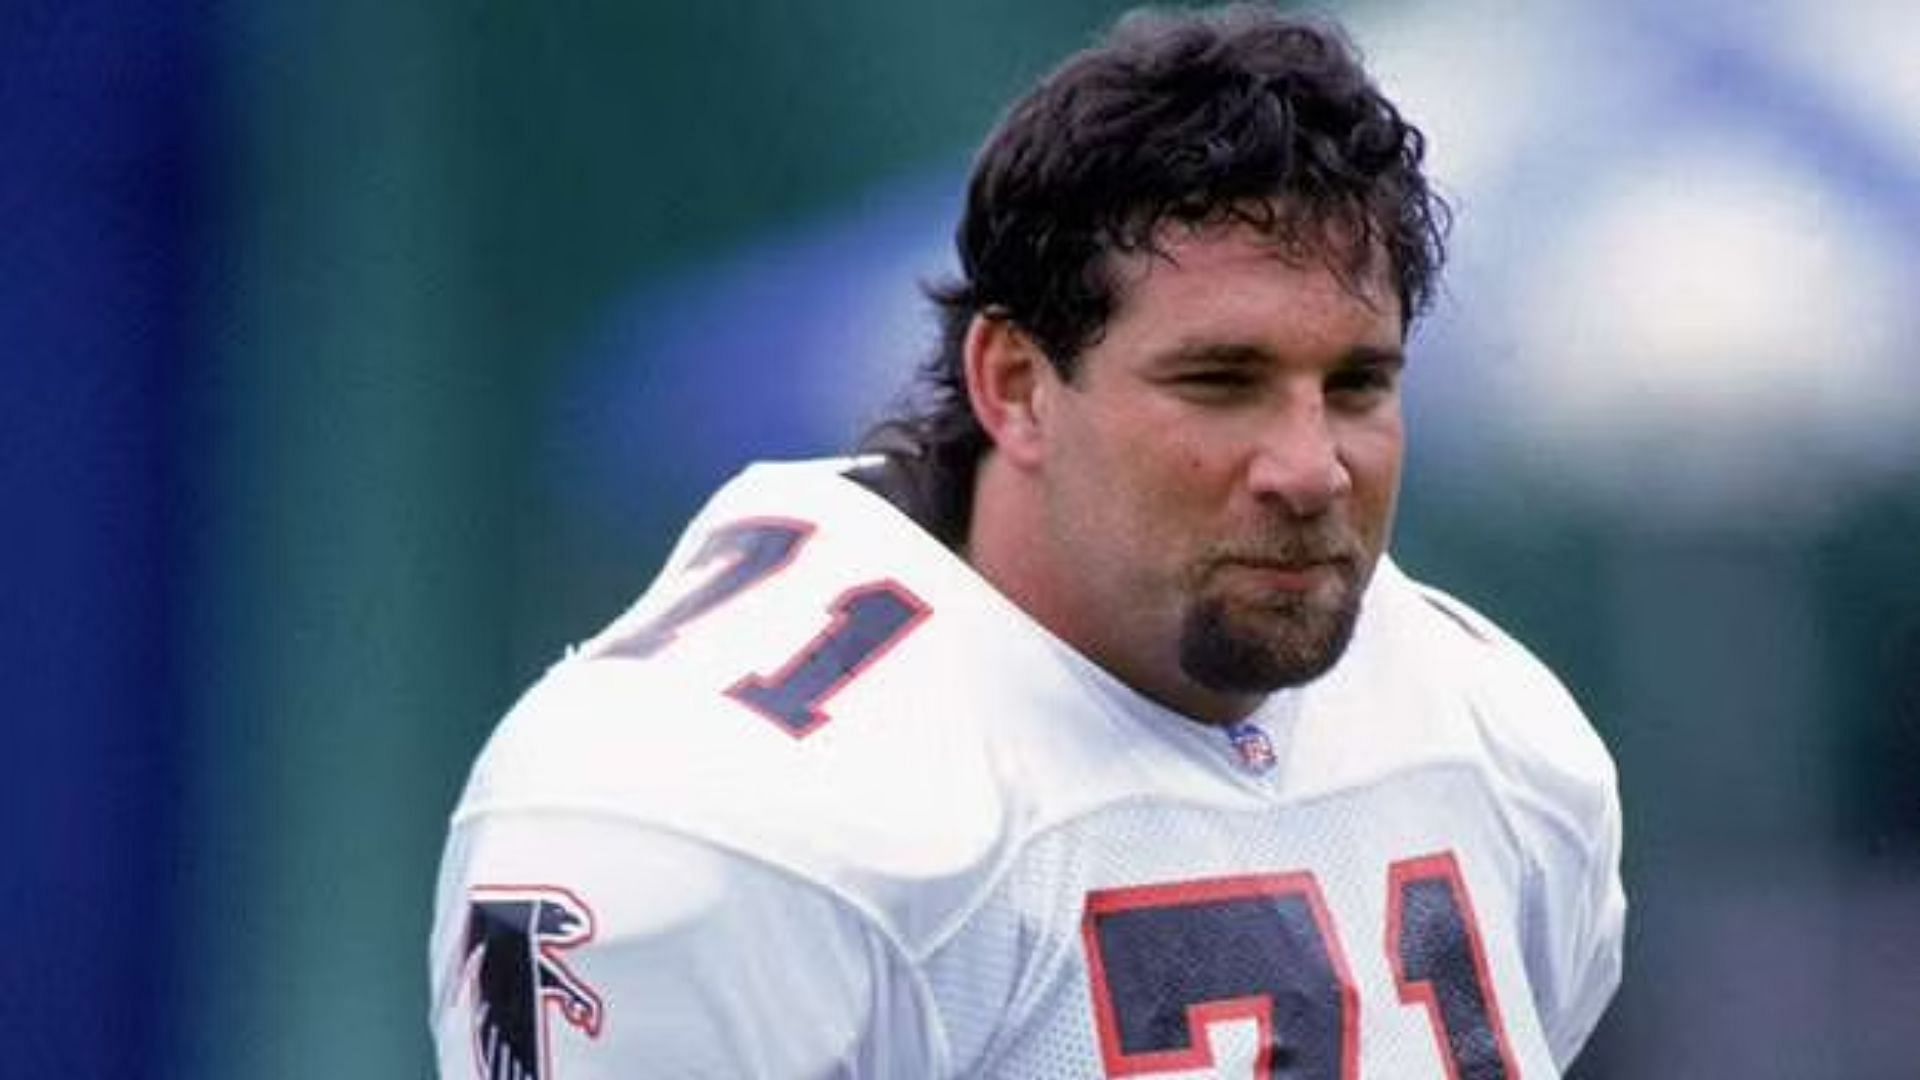 Goldberg played in the NFL prior to his wrestling career